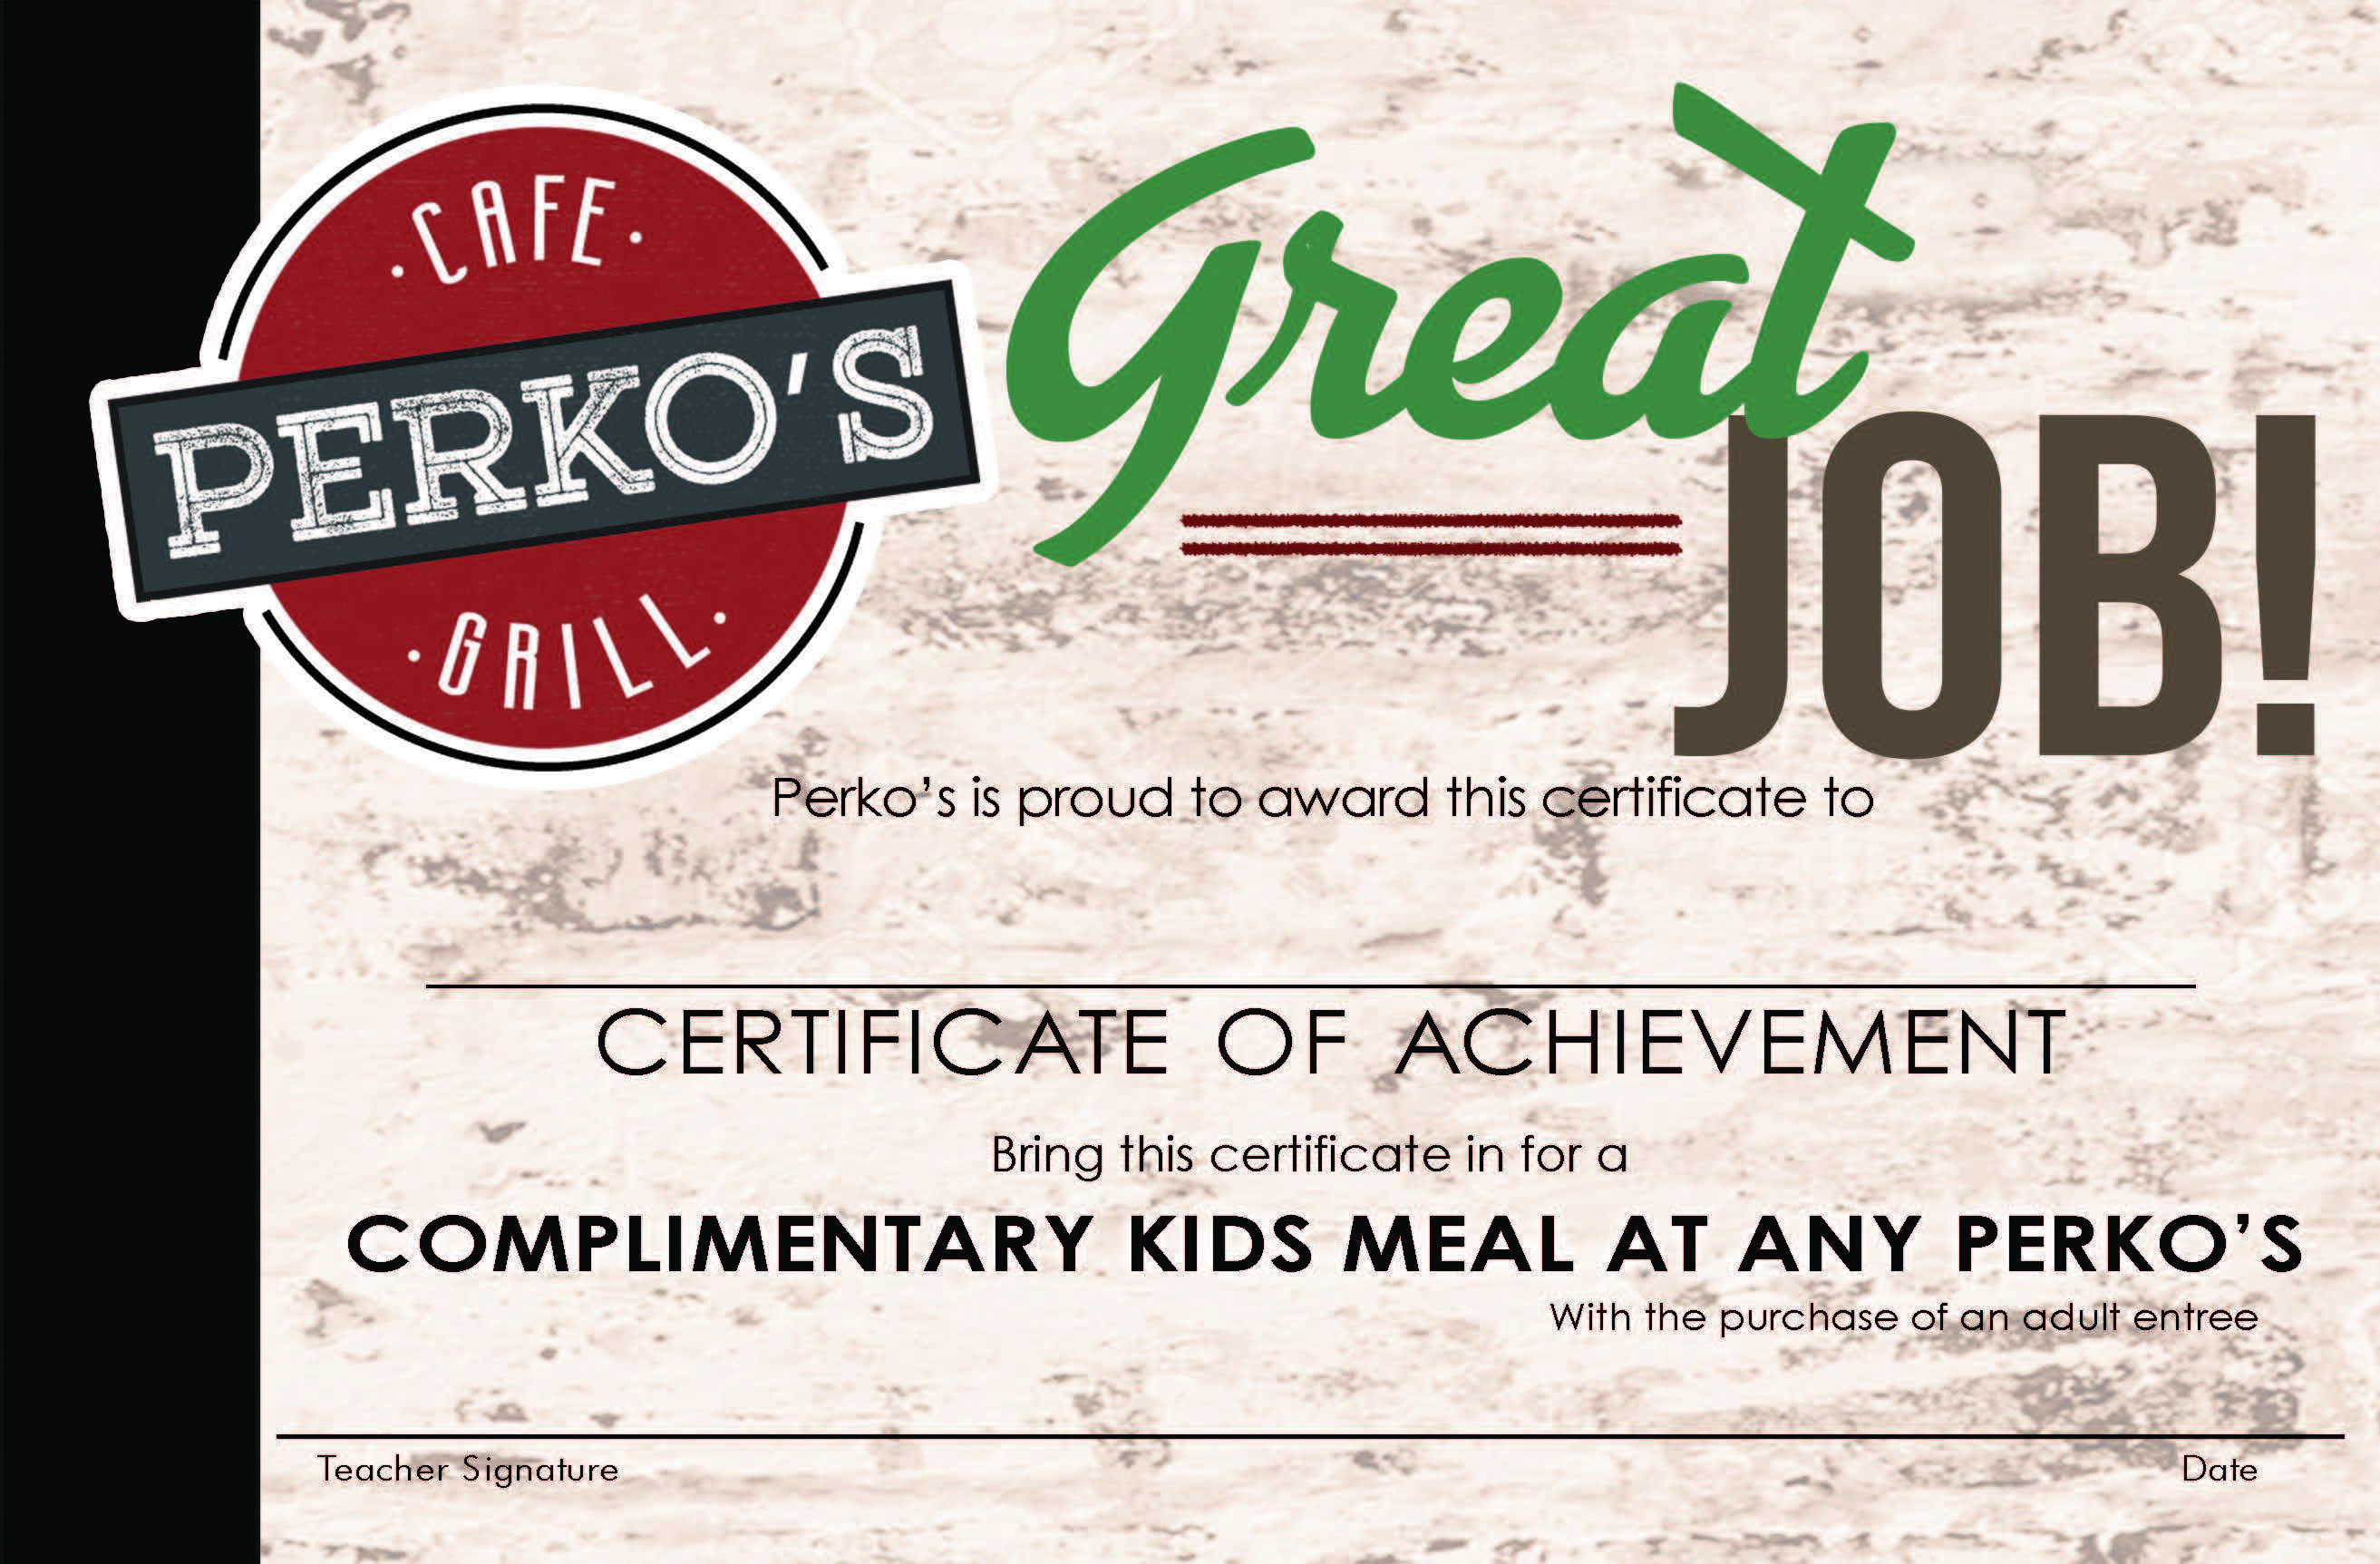 A certificate award for a complimentary kid's meal at any Perko's. 